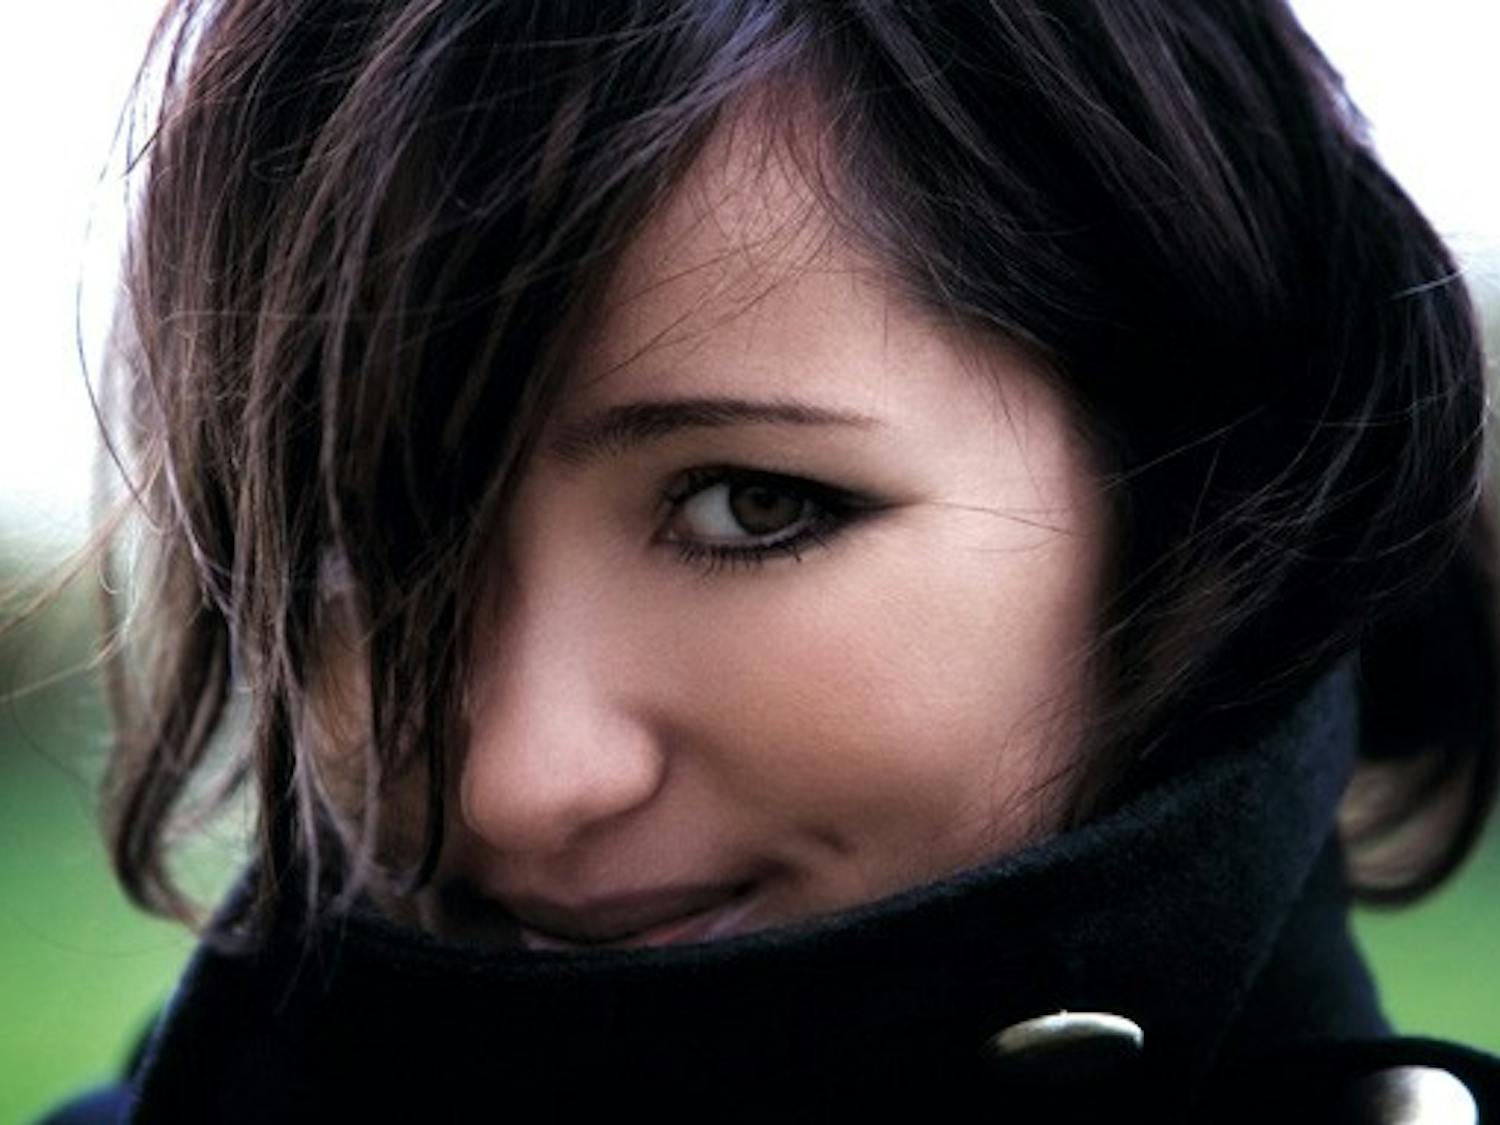 KT Tunstall smiles for a promotional photo. The Scottish singer has released a new album, Tiger Suit.